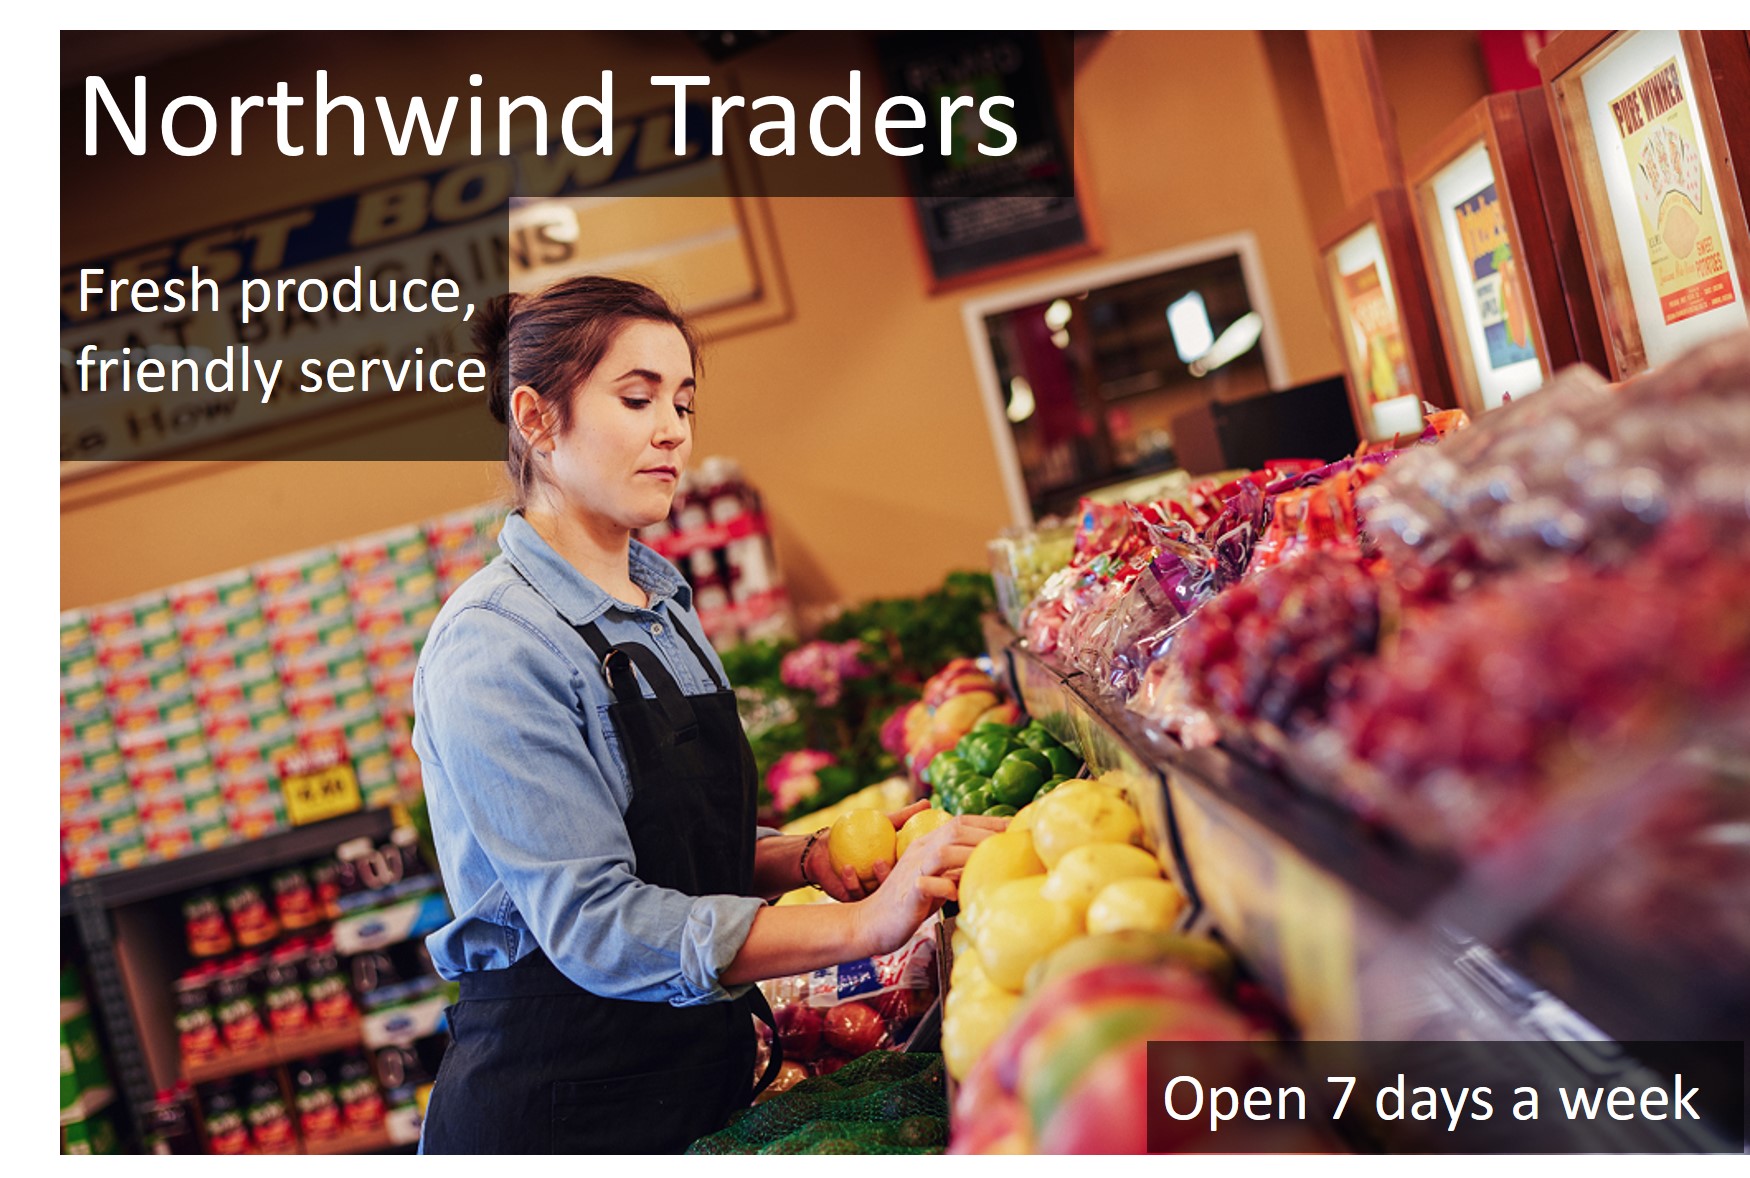 An image of an advertisement for Northwind Traders grocery store.